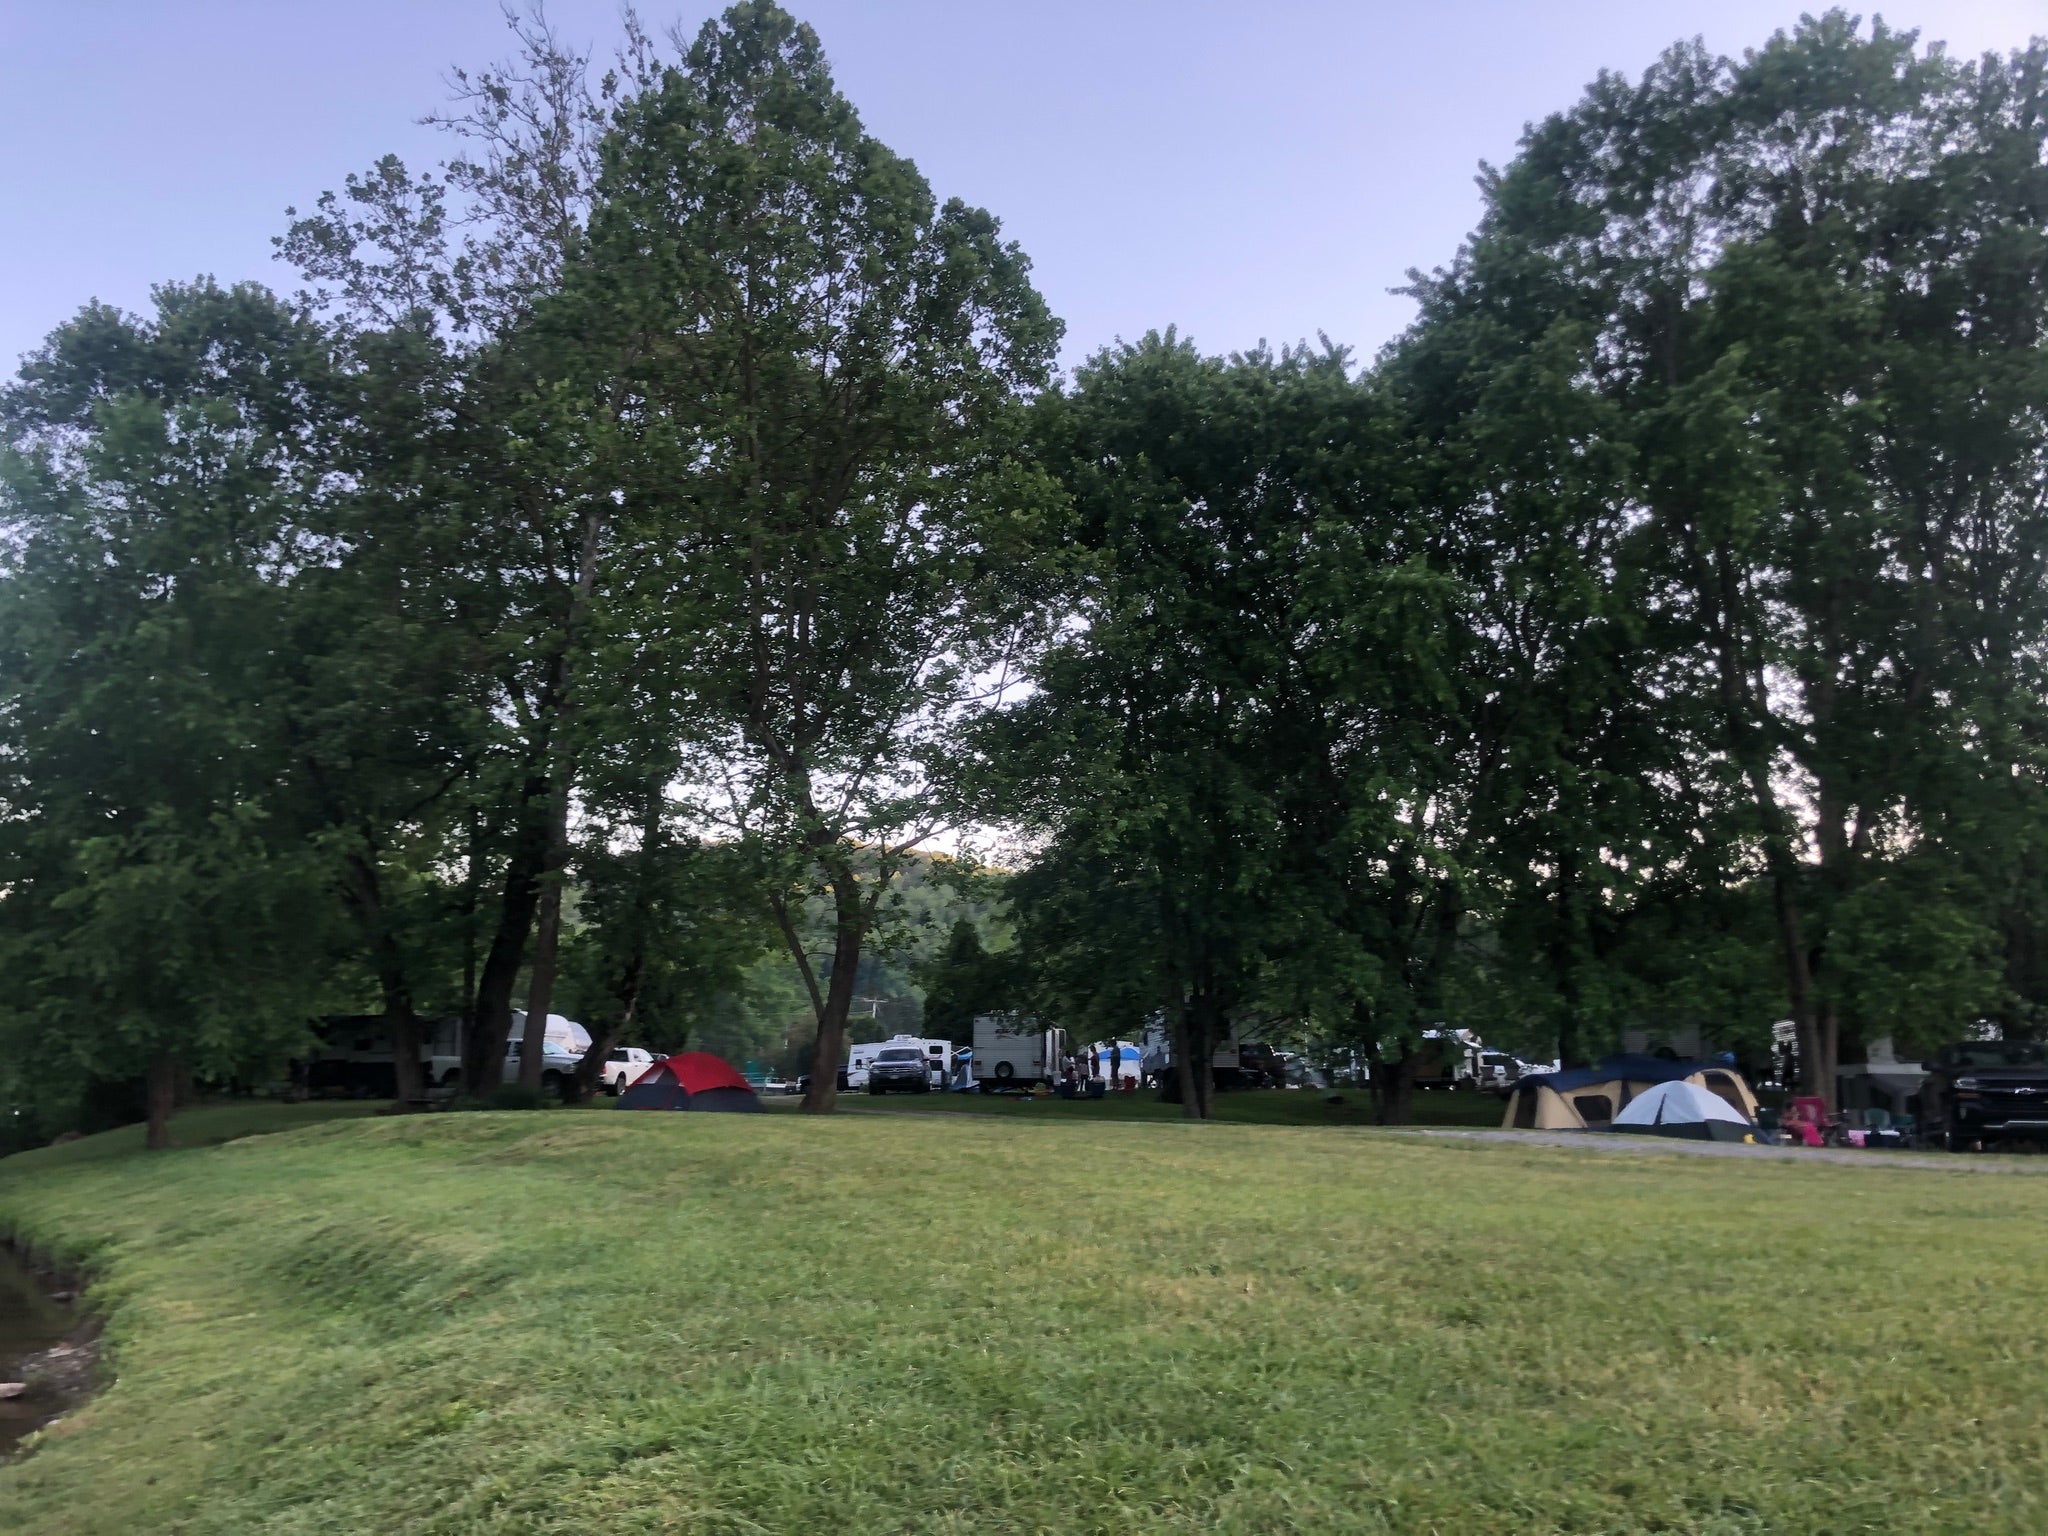 View of campground from the river